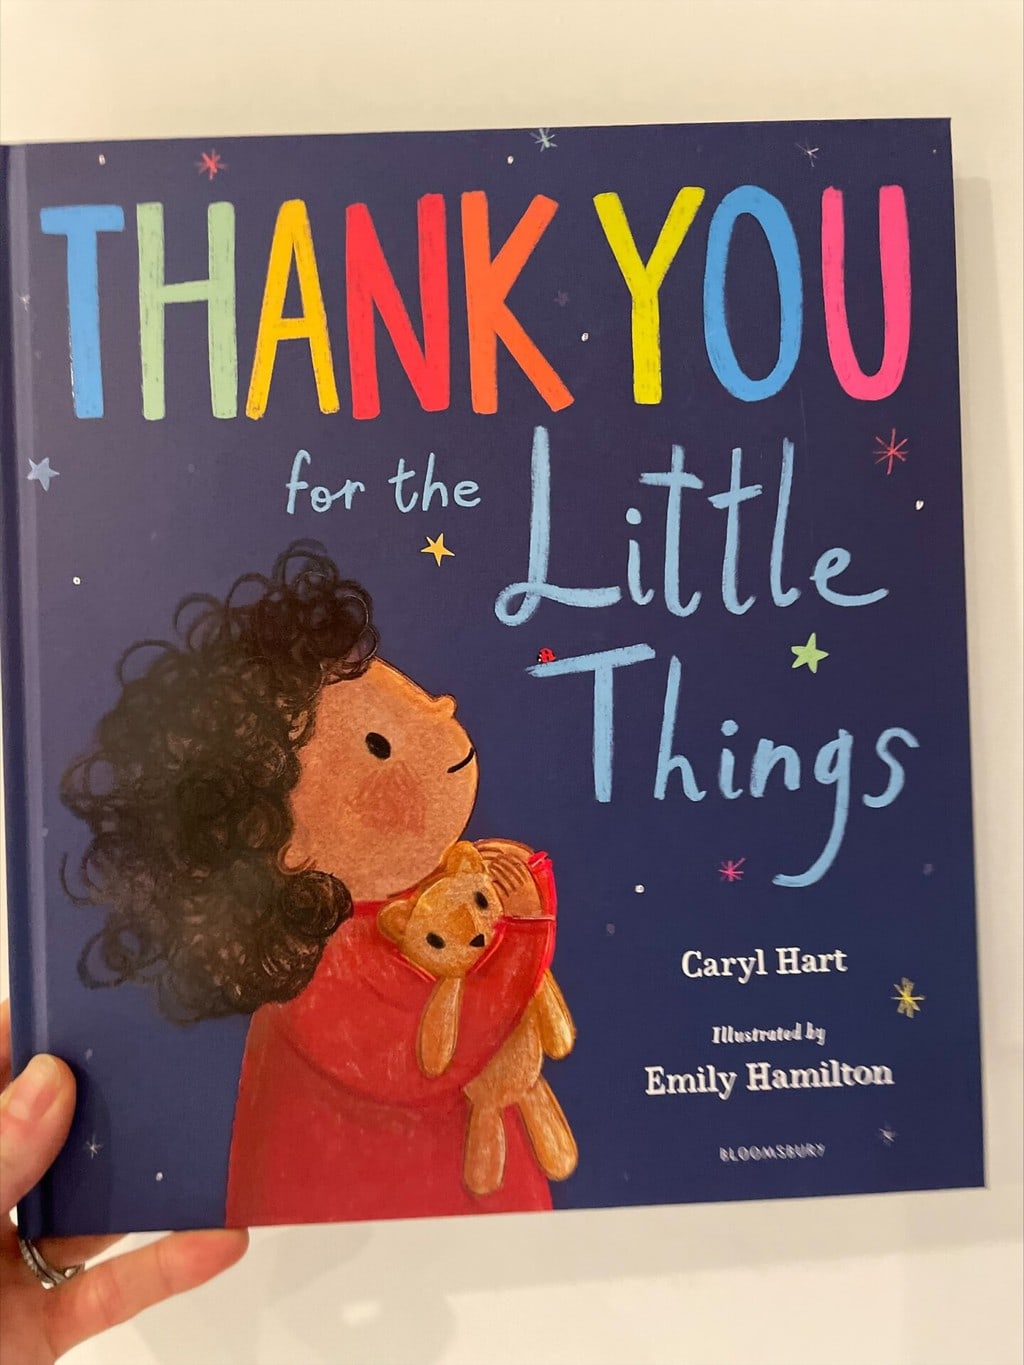 Thank You for the Little Things – Caryl Hart (author), Emily Hamilton (illustrator), Bloomsbury Children’s Books (publisher)